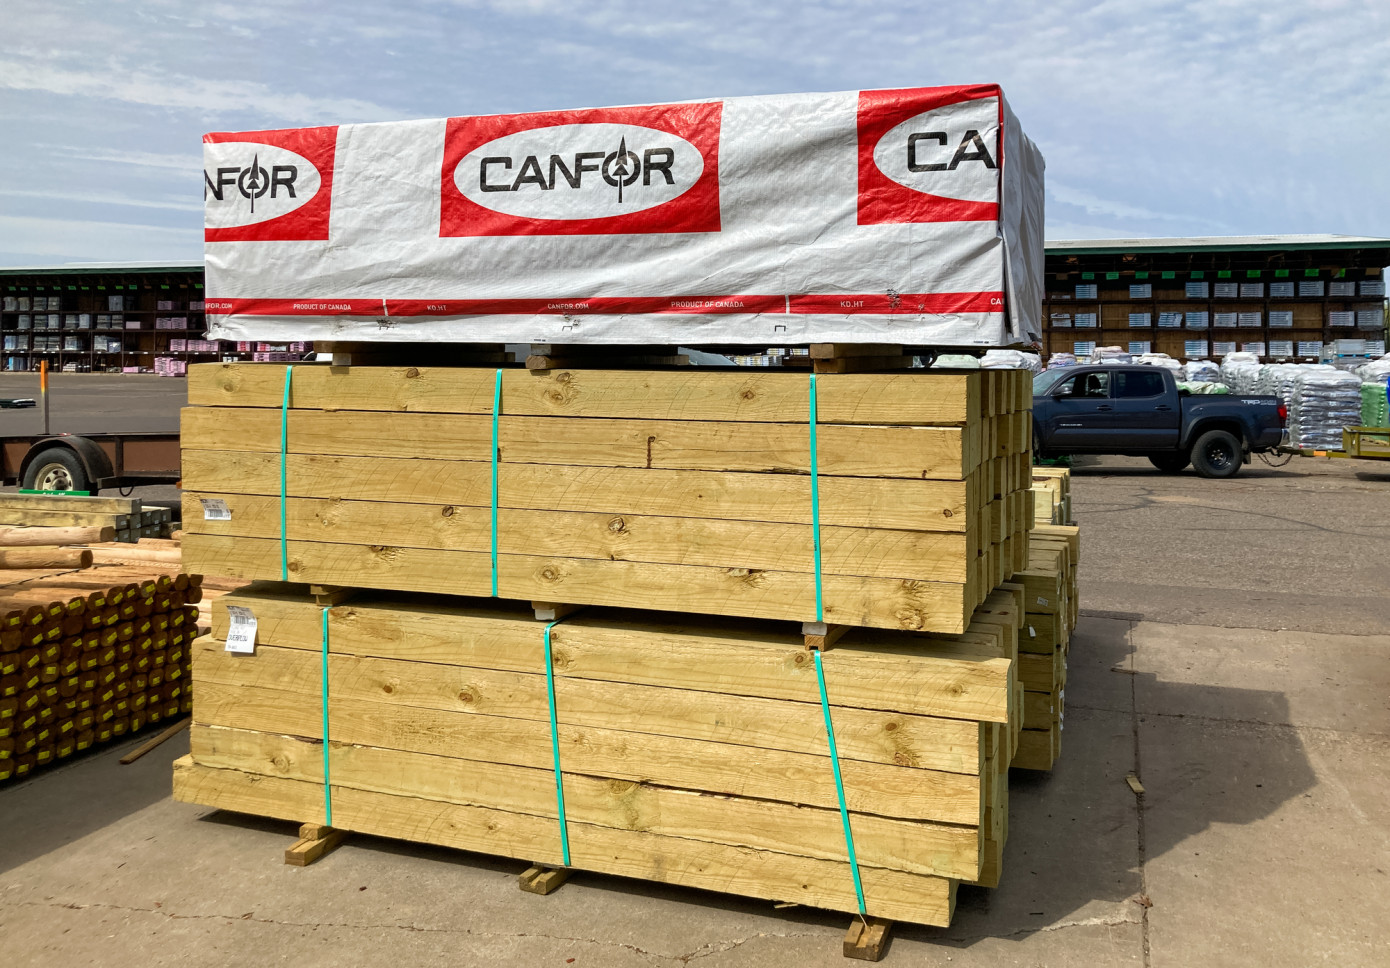 Canfor"s 1Q sales increased by 14%